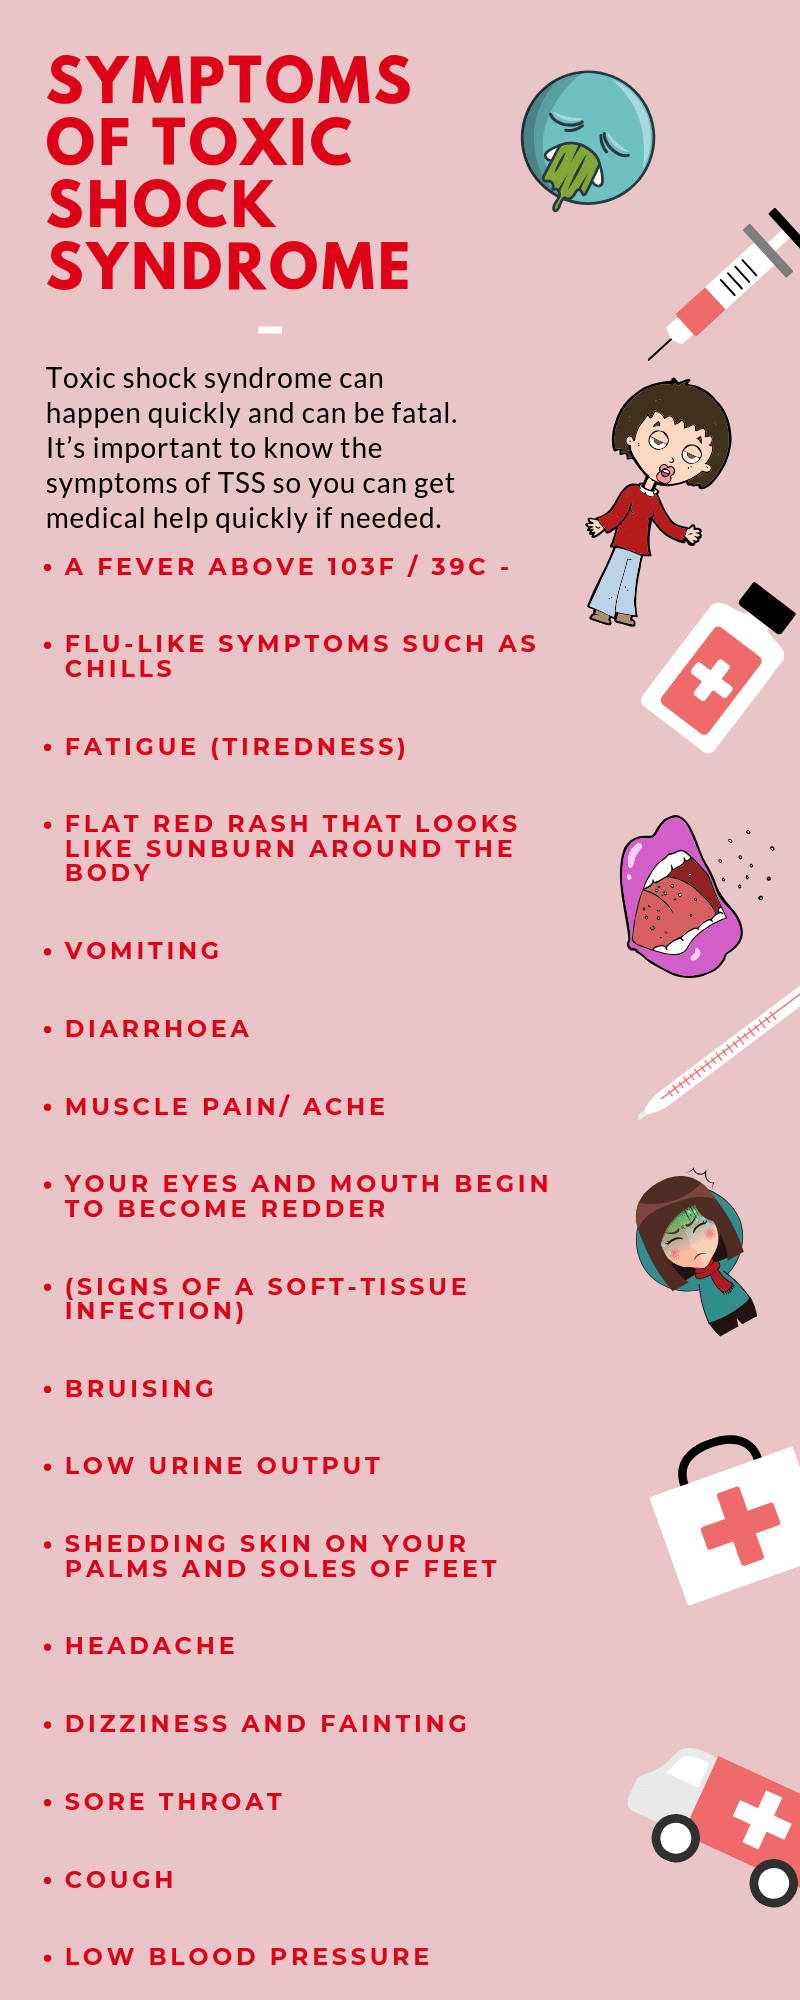 Menstrupedia - Toxic Shock Syndrome or #TSS is caused by a bacterial  infection complication. Here are the symptoms, if you use a #tampon, be  sure to remove it after 4-6 hours! We